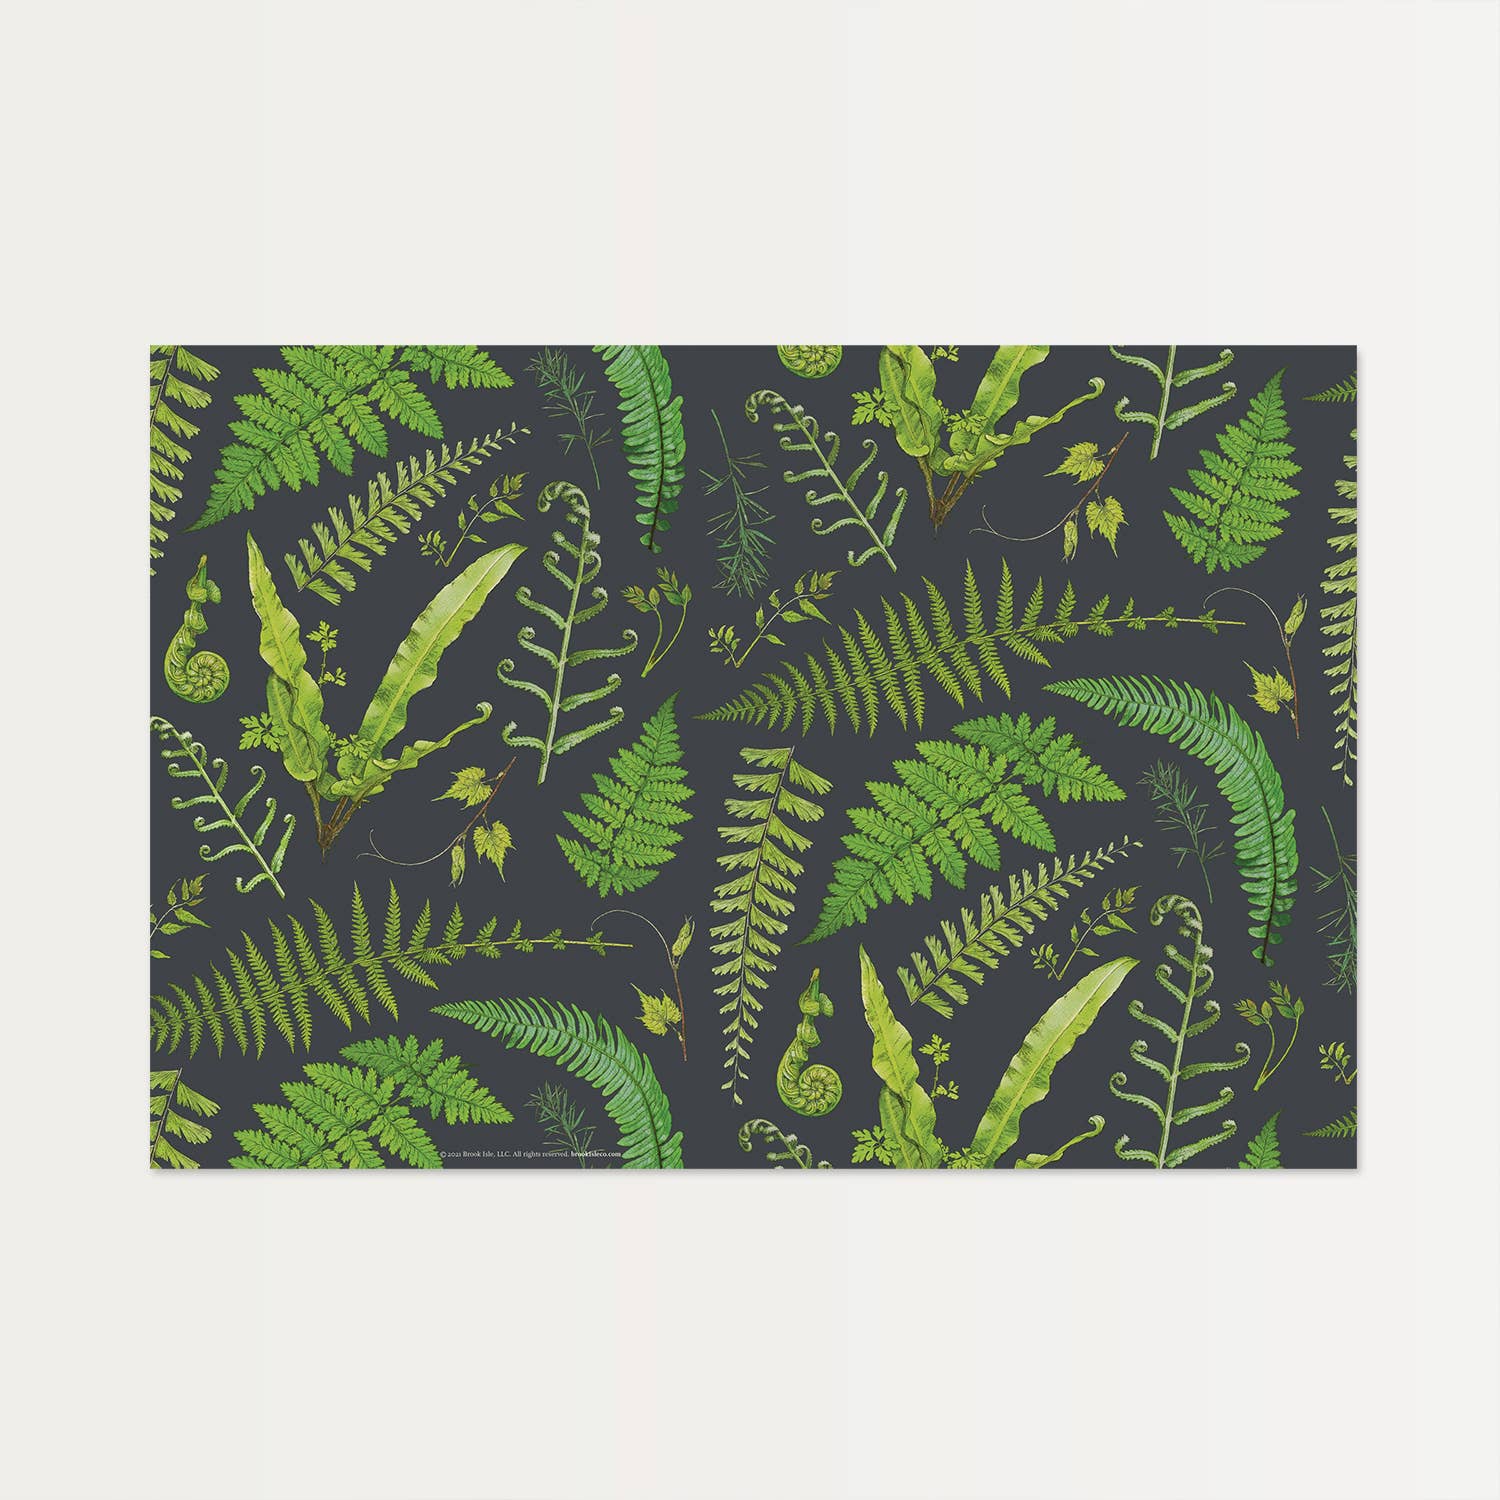 Paper Placemats (Set of 12) - Fenwick & OliverPaper Placemats (Set of 12)PaperBrook IsleFenwick & OliverMAT-Fern